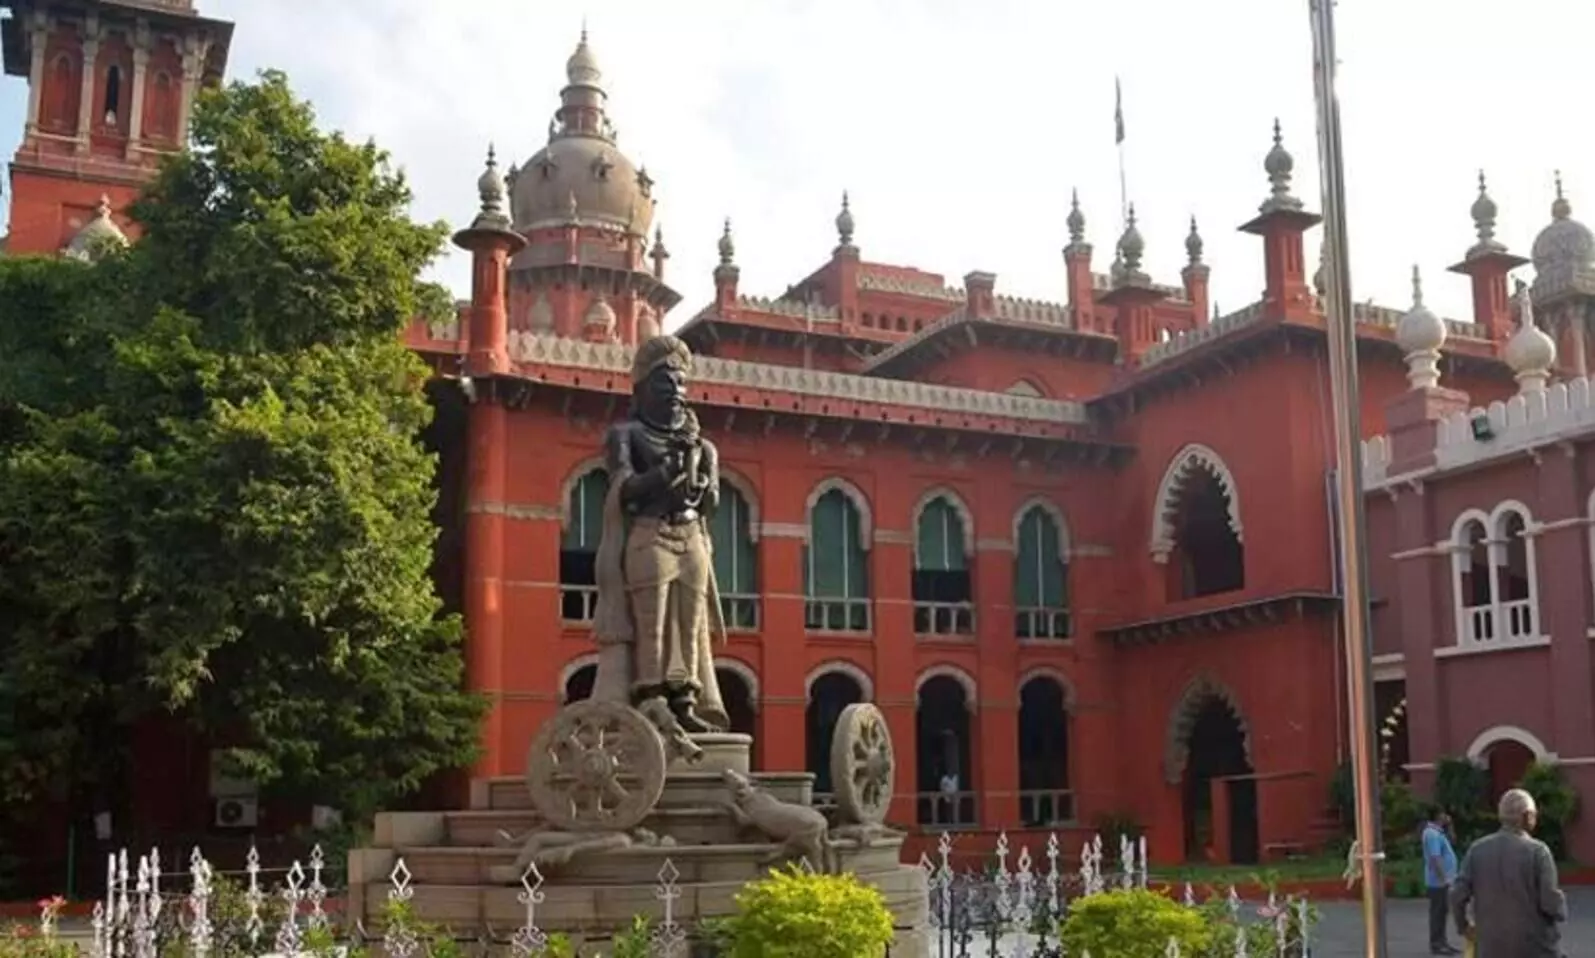 Receive no gifts from third parties: Madras HC directs judges